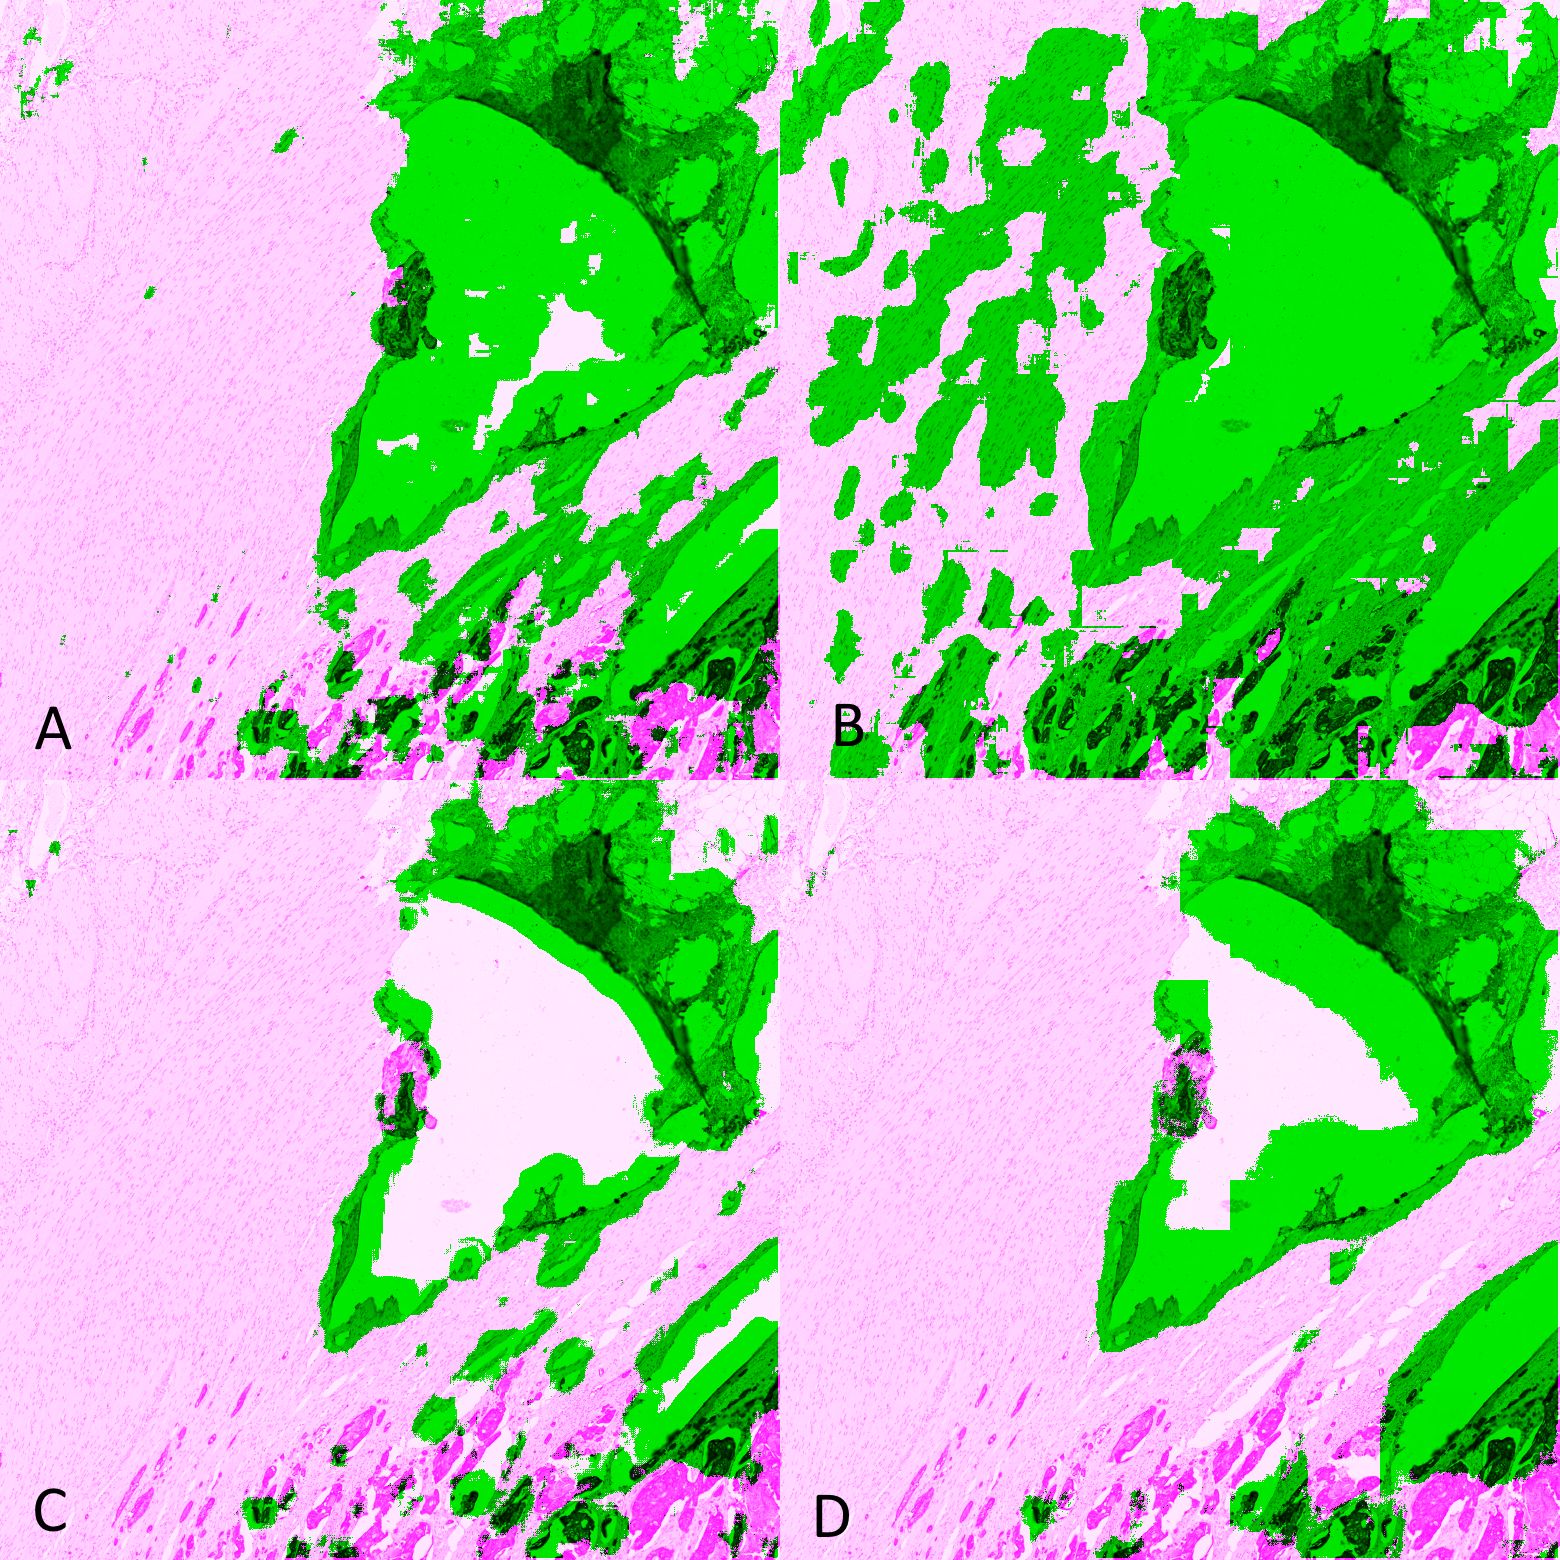 Figure 6.8. Predictions on a validation tile for (A) ShortRes / Only Positive, (B) U-Net / Only Positive, (C) ShortRes / GA50, (D) U-Net / GA50. Detected artefacts are shown in green, normal tissue is shown in pink.